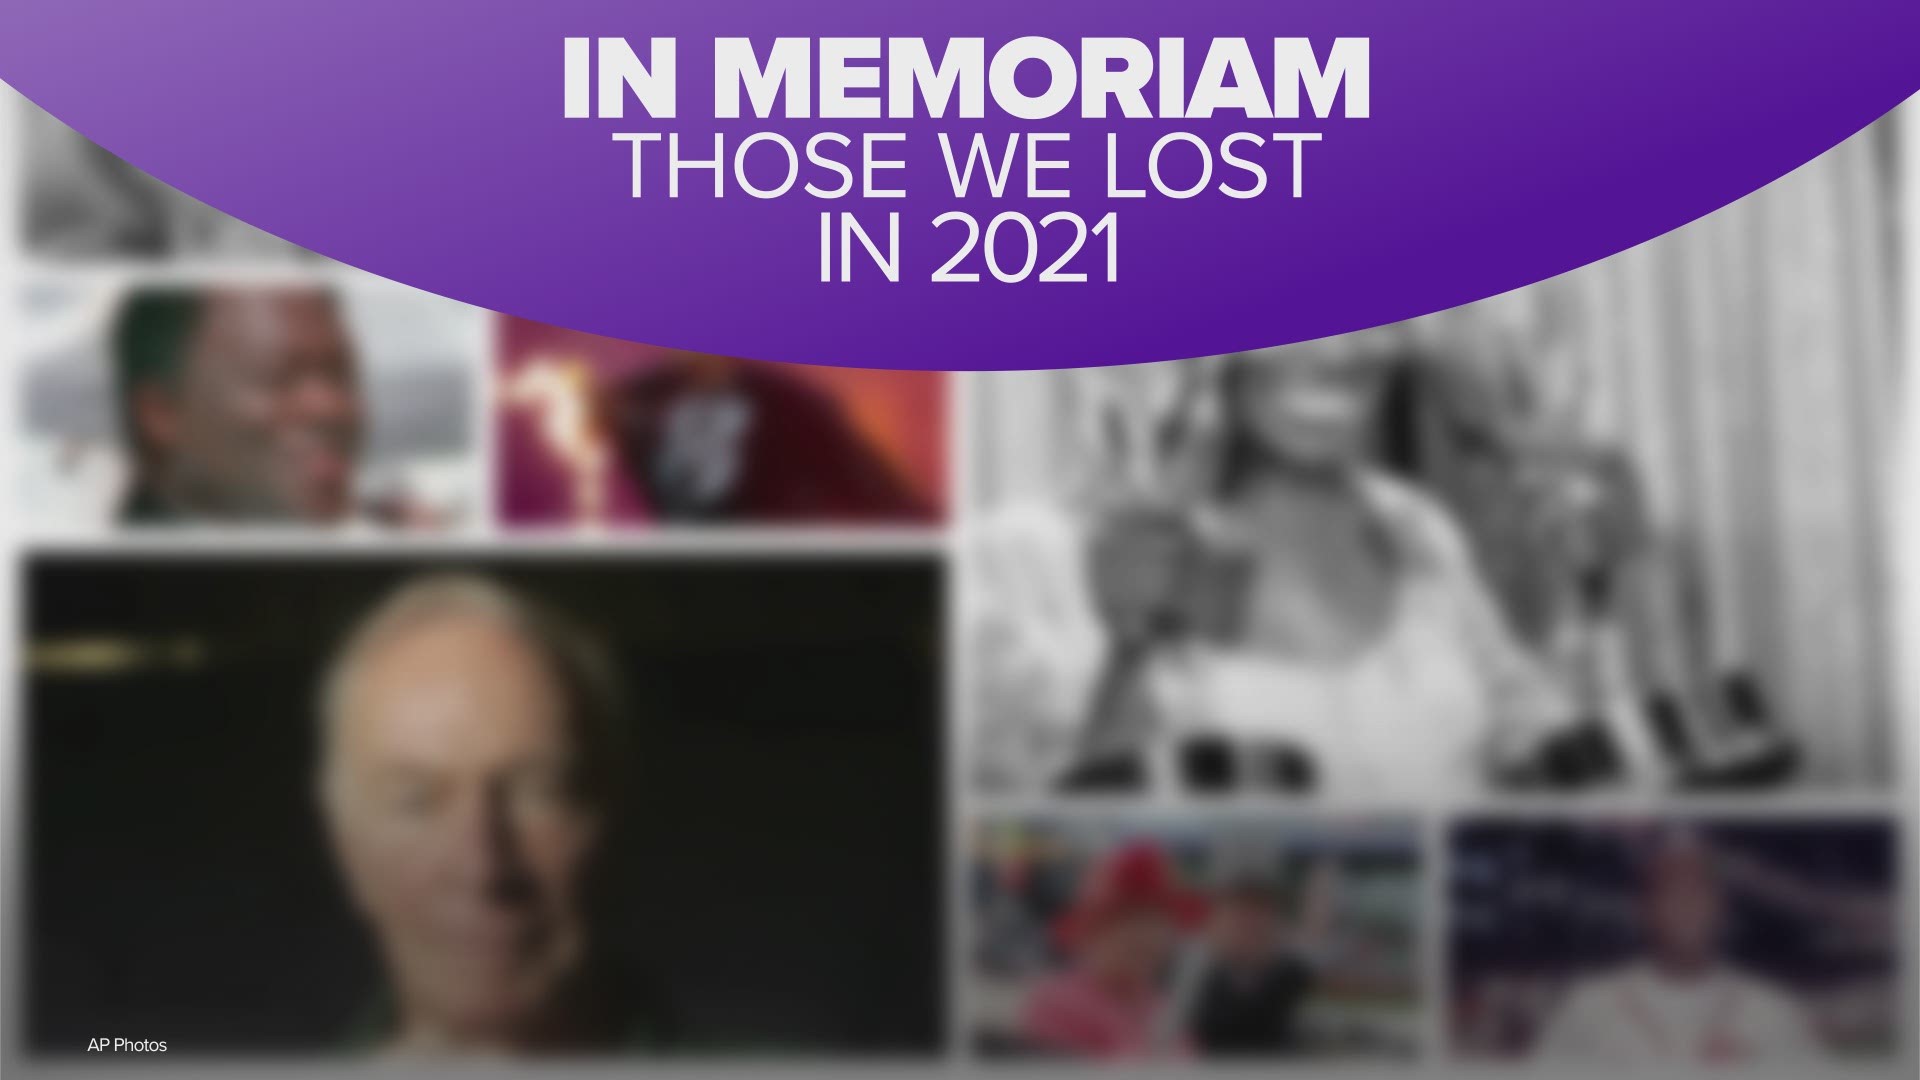 A look at entertainers, sports figures and newsmakers we lost in 2021.